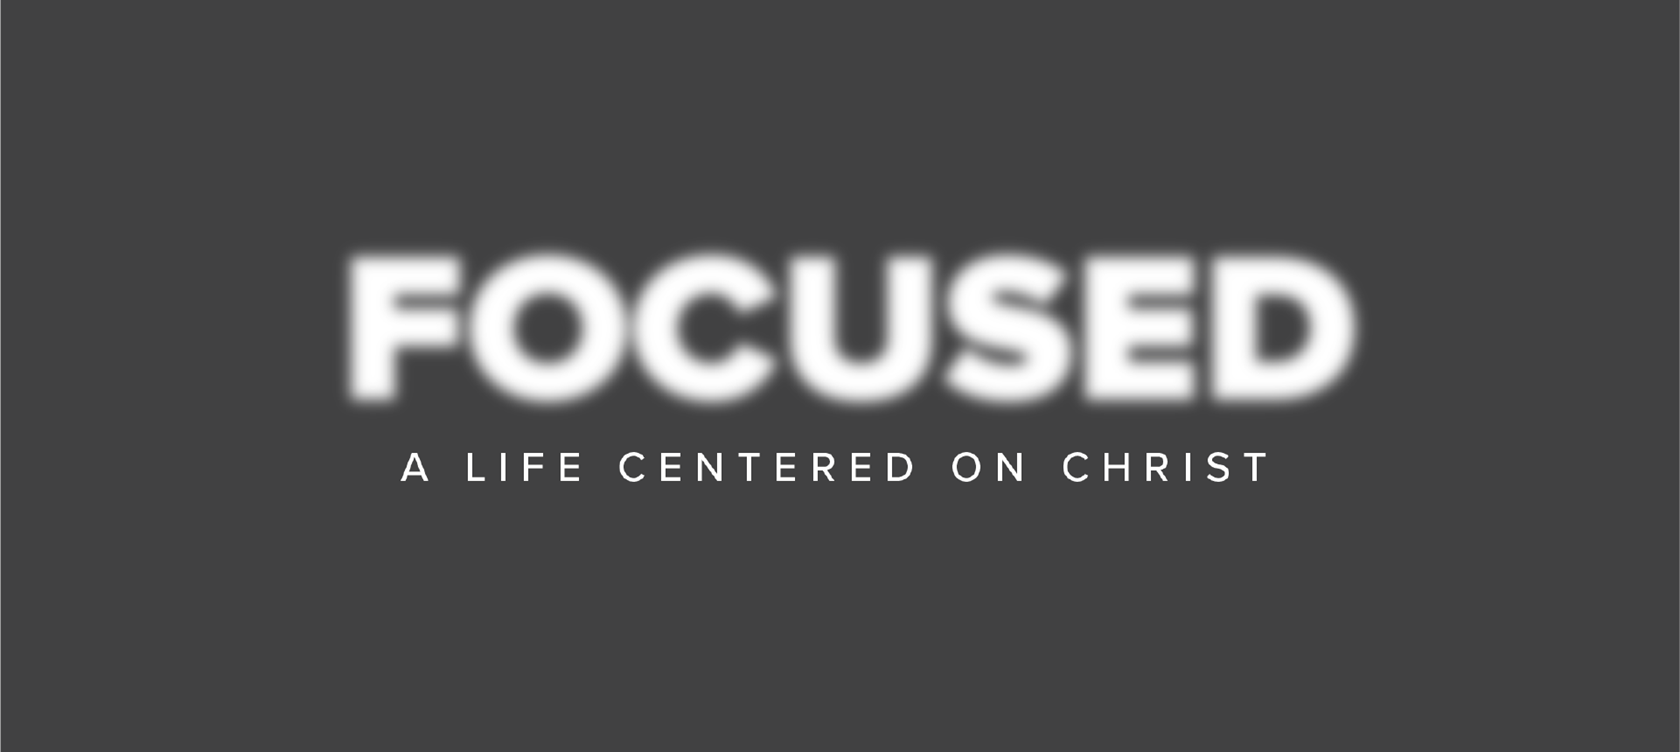 Series graphic for Focused A Life Centered in Christ (Colossians)